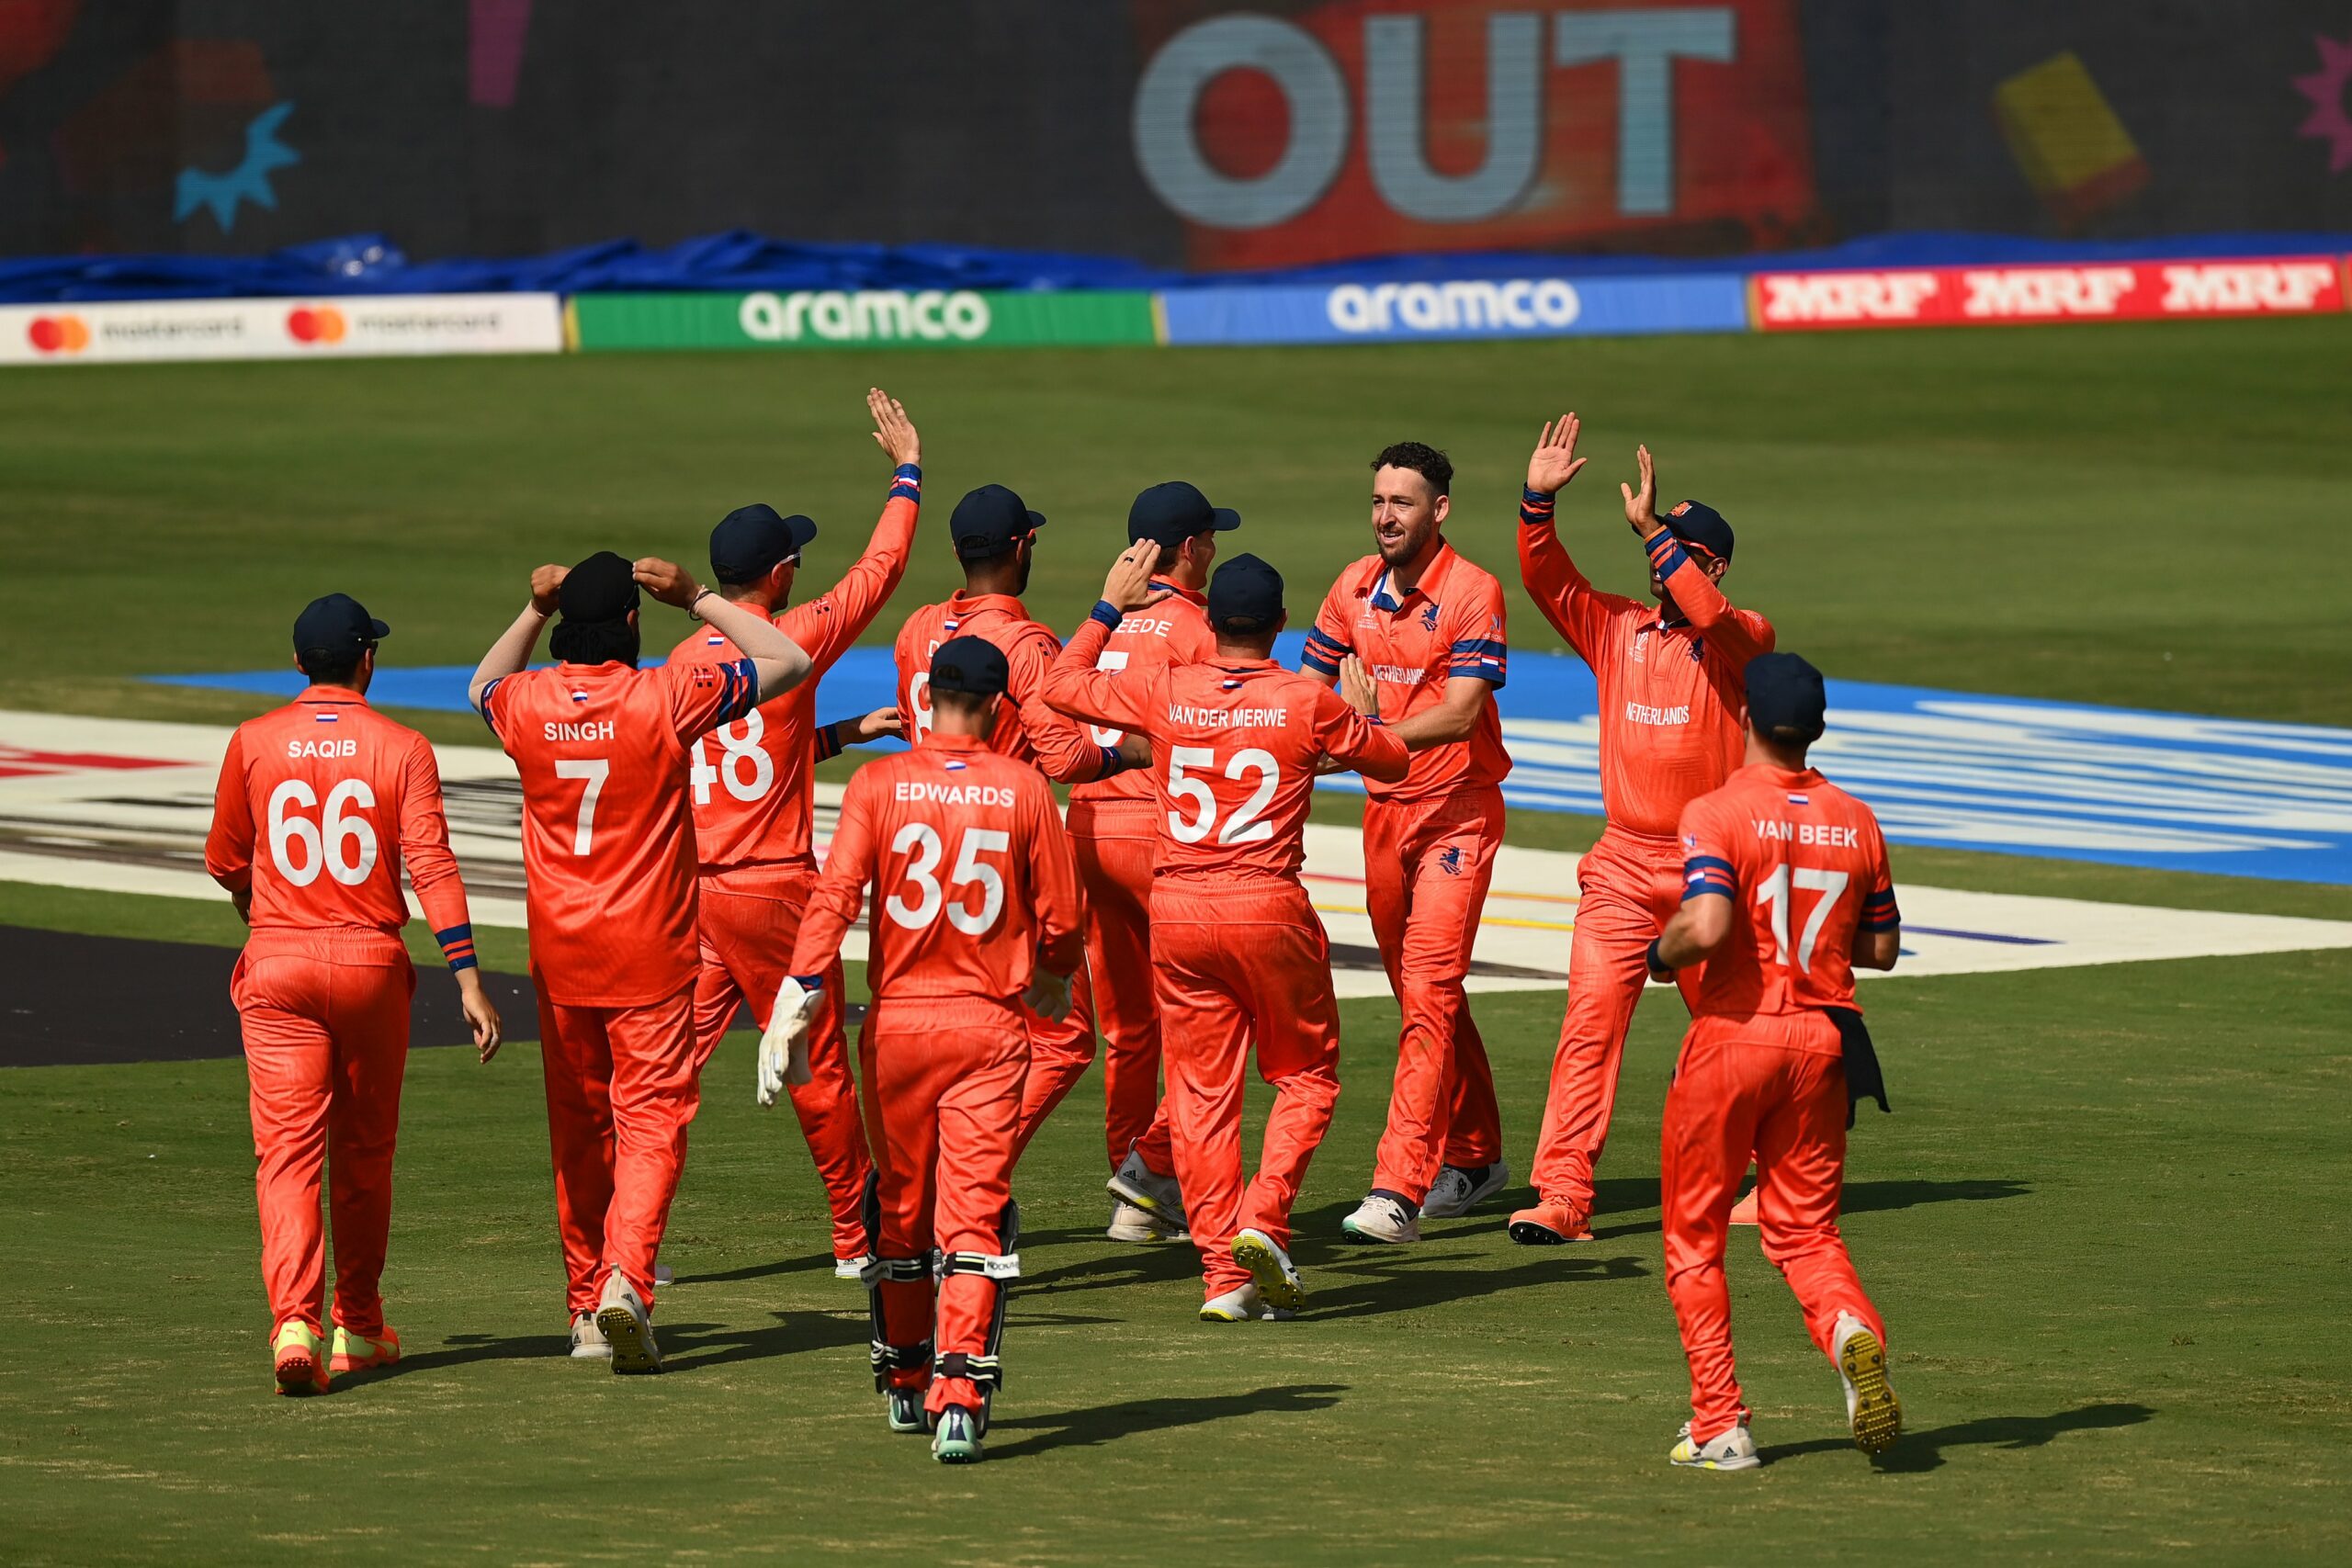 Cricket: Dutch set for a competitive build-up to T20 World Cup – DutchNews.nl